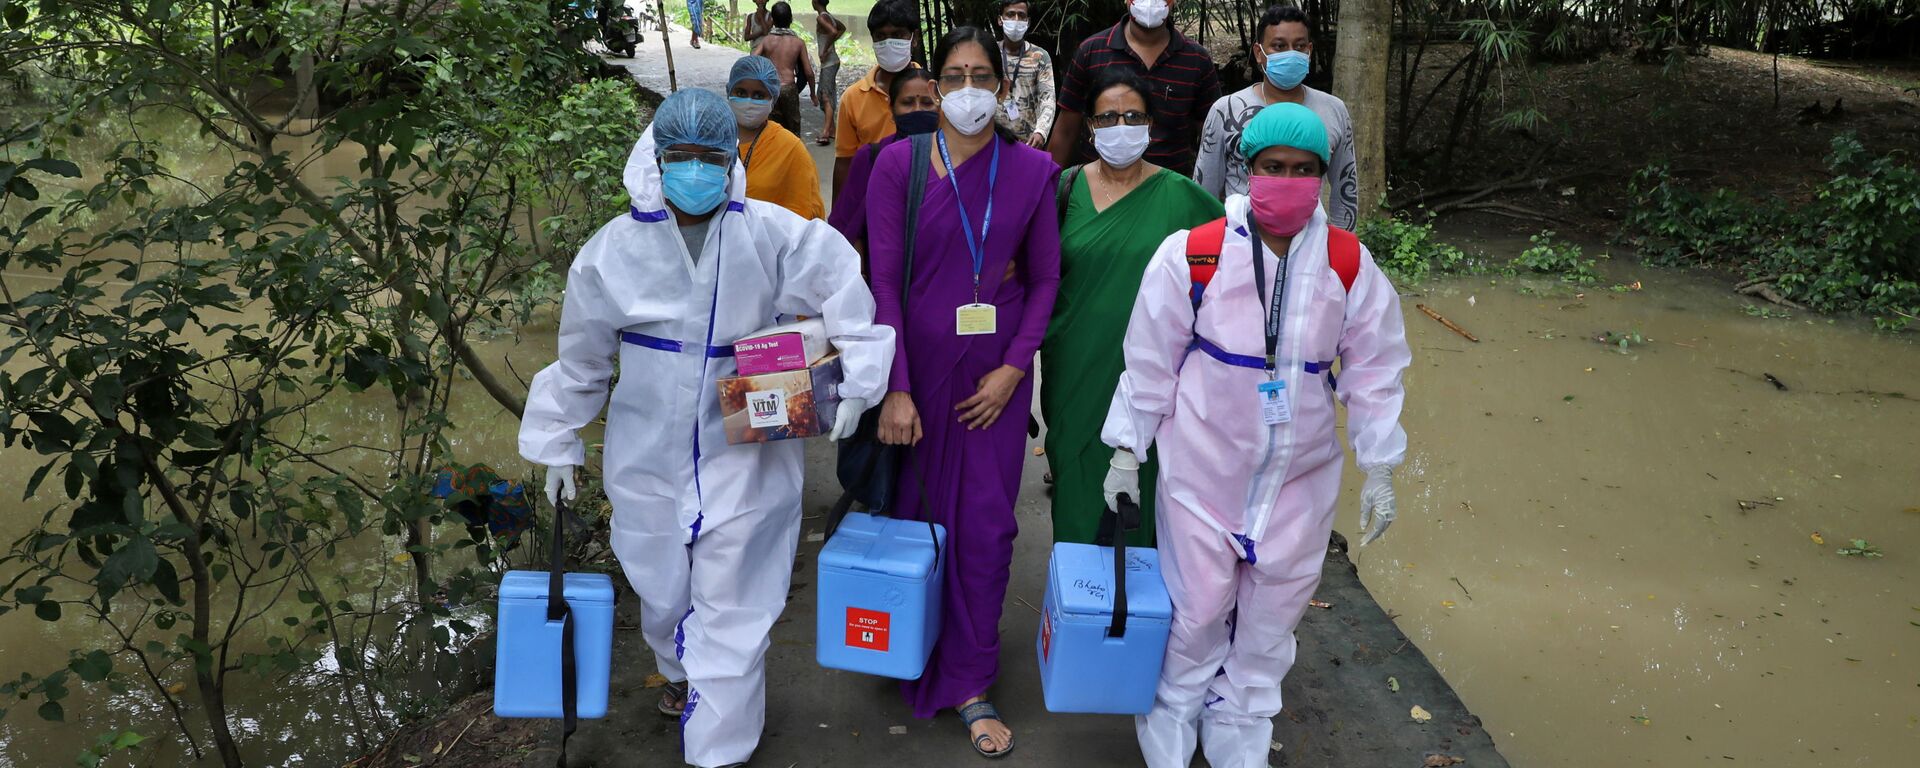 Healthcare workers carry the COVISHIELD vaccine, a coronavirus disease (COVID-19) vaccine manufactured by Serum Institute of India, to inoculate villagers during a door-to-door vaccination and testing drive at Uttar Batora Island in Howrah district in West Bengal state, India on 21 June 2021. - Sputnik International, 1920, 30.06.2021